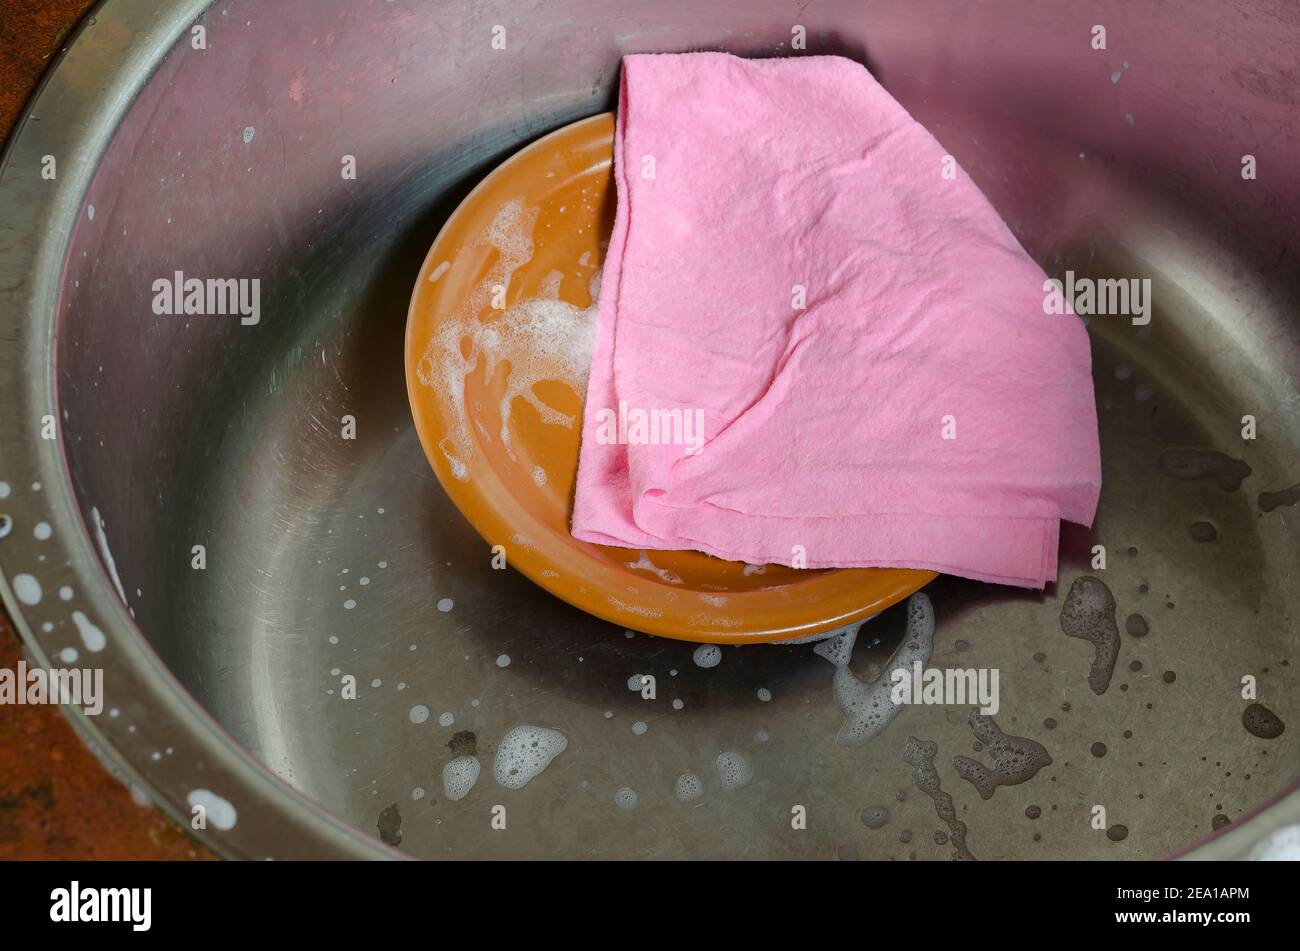 https://c8.alamy.com/comp/2EA1APM/pink-viscose-dishcloth-and-brown-plate-in-the-metal-kitchen-sink-with-foam-cleaning-dishwashing-household-chores-close-up-selective-focus-2EA1APM.jpg